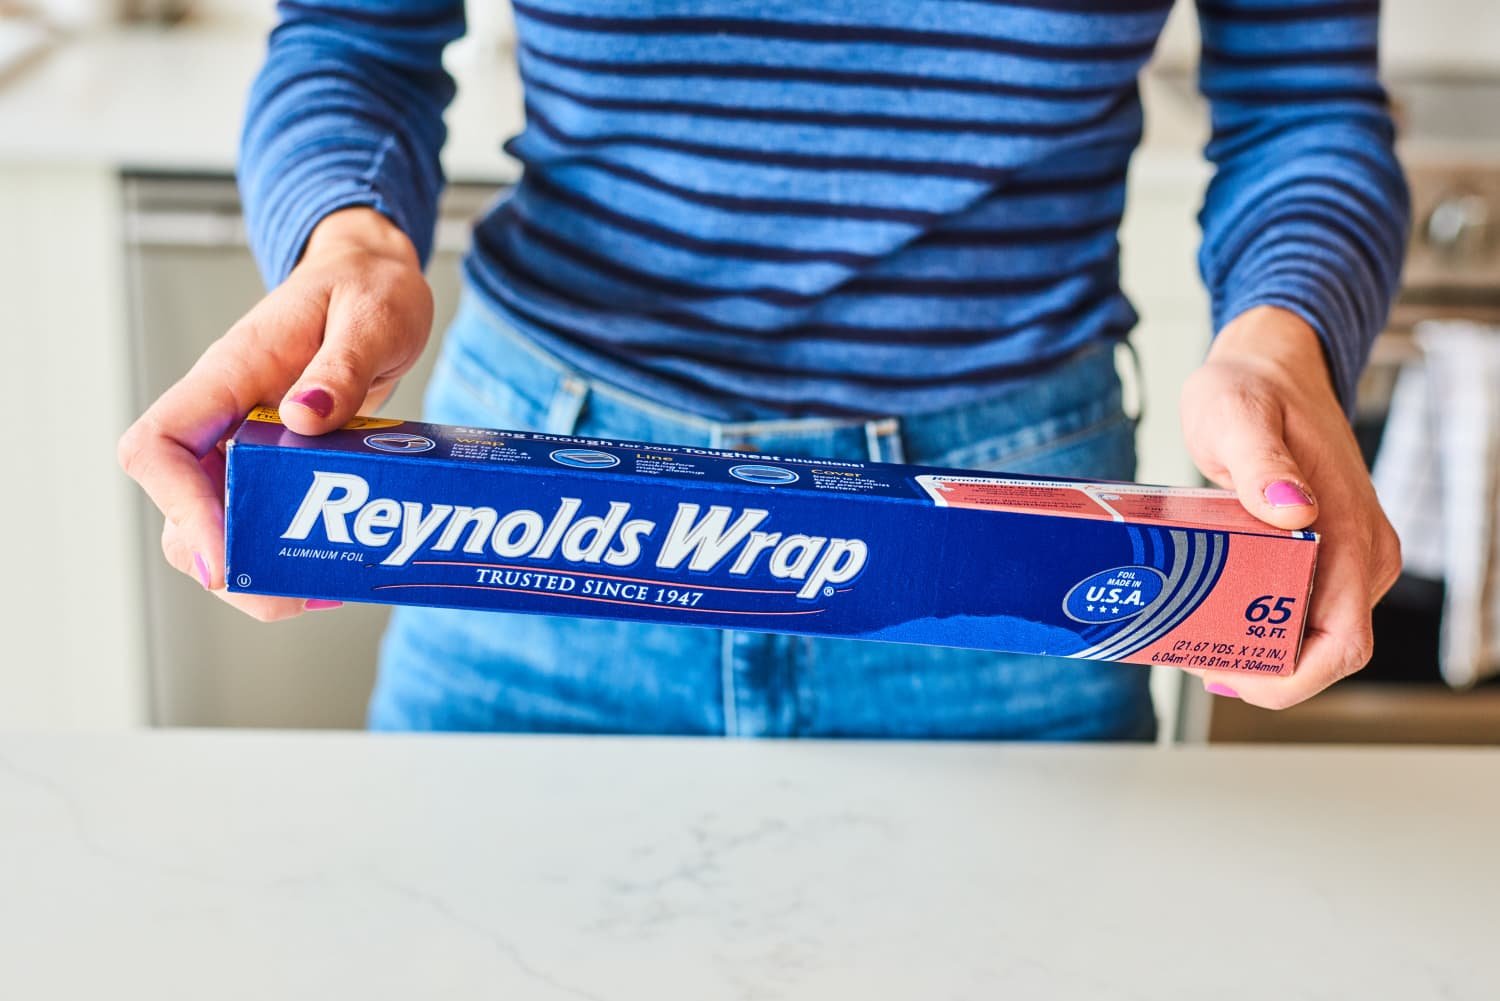 The First Thing You Should Do with a New Box of Aluminum Foil